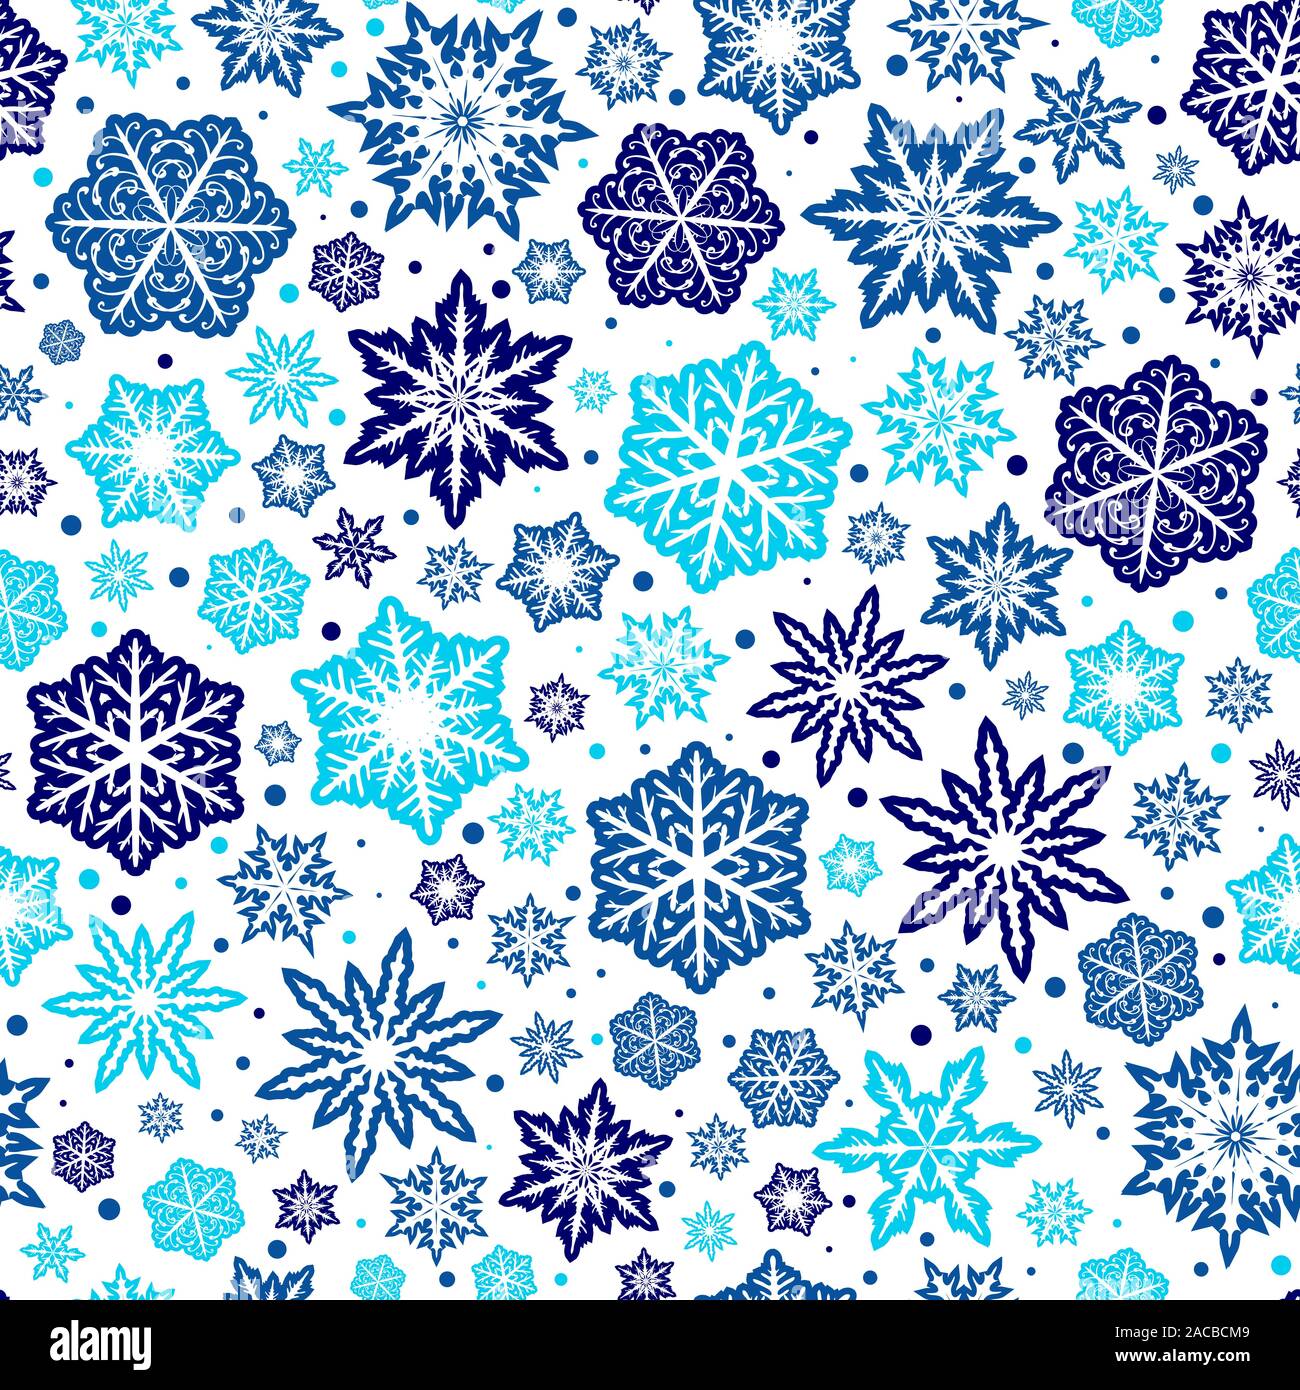 Seamless pattern with snowflakes. Vector illustration Stock Vector